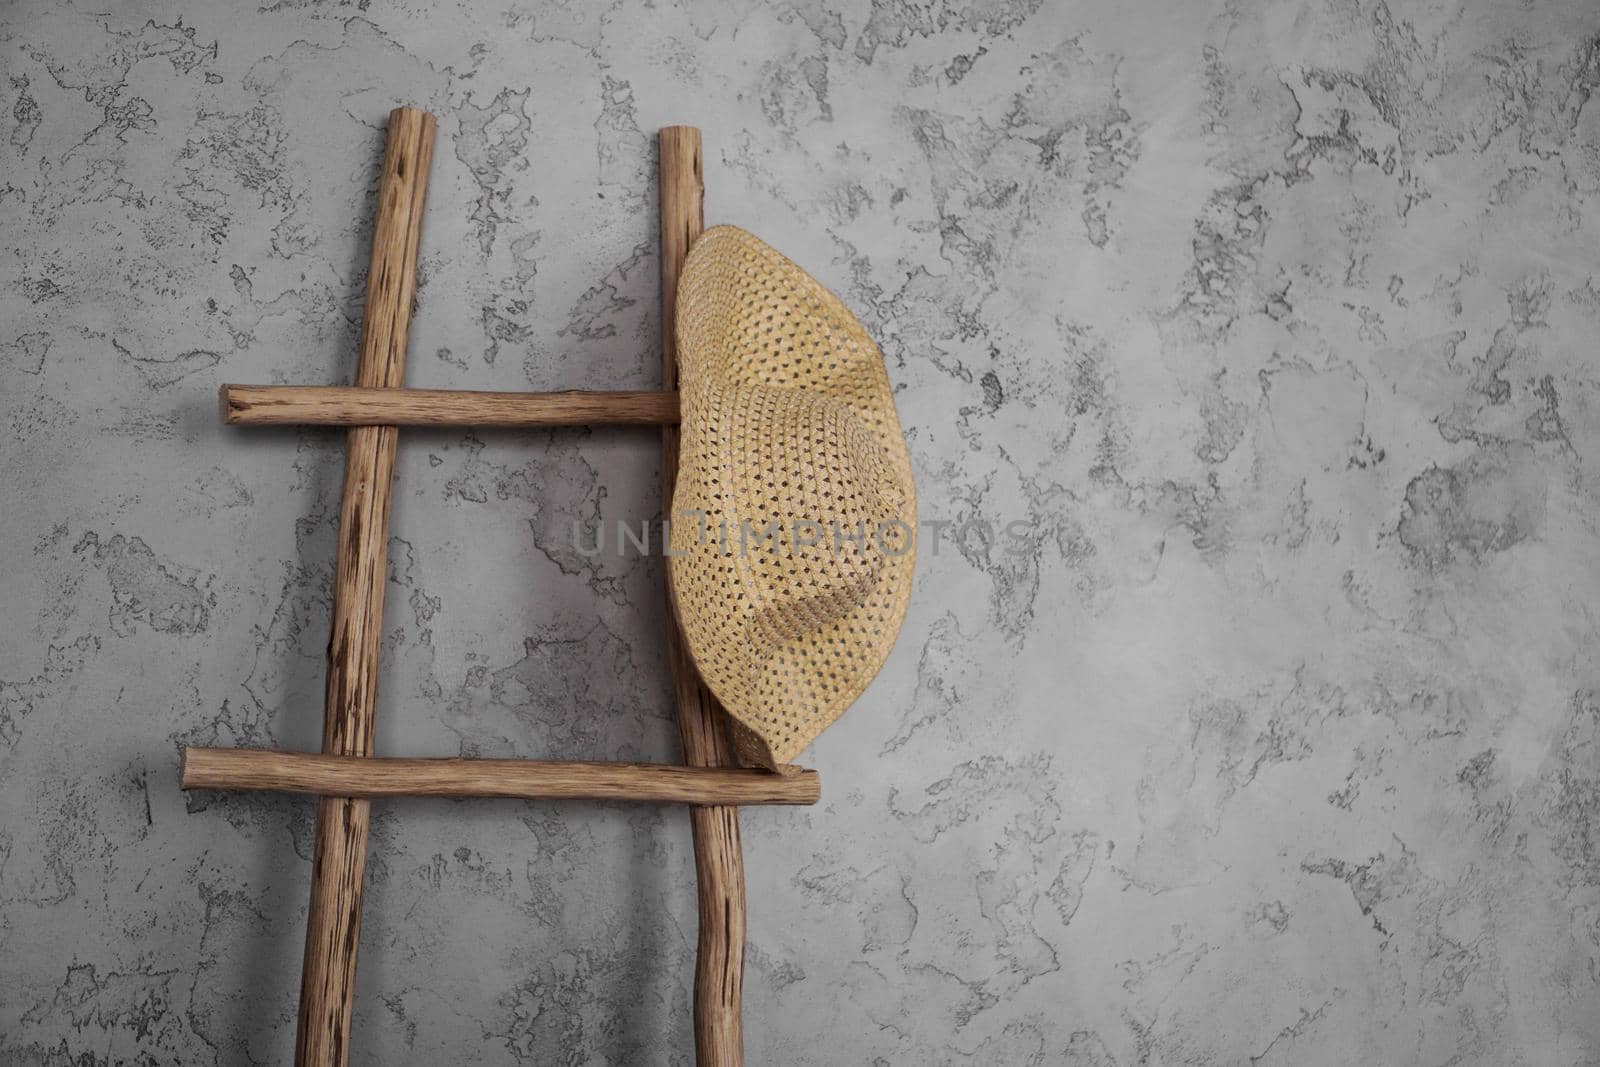 Wall with rough plaster. On the wall is an old wooden staircase. A wicker straw hat on a rustic staircase. Country style